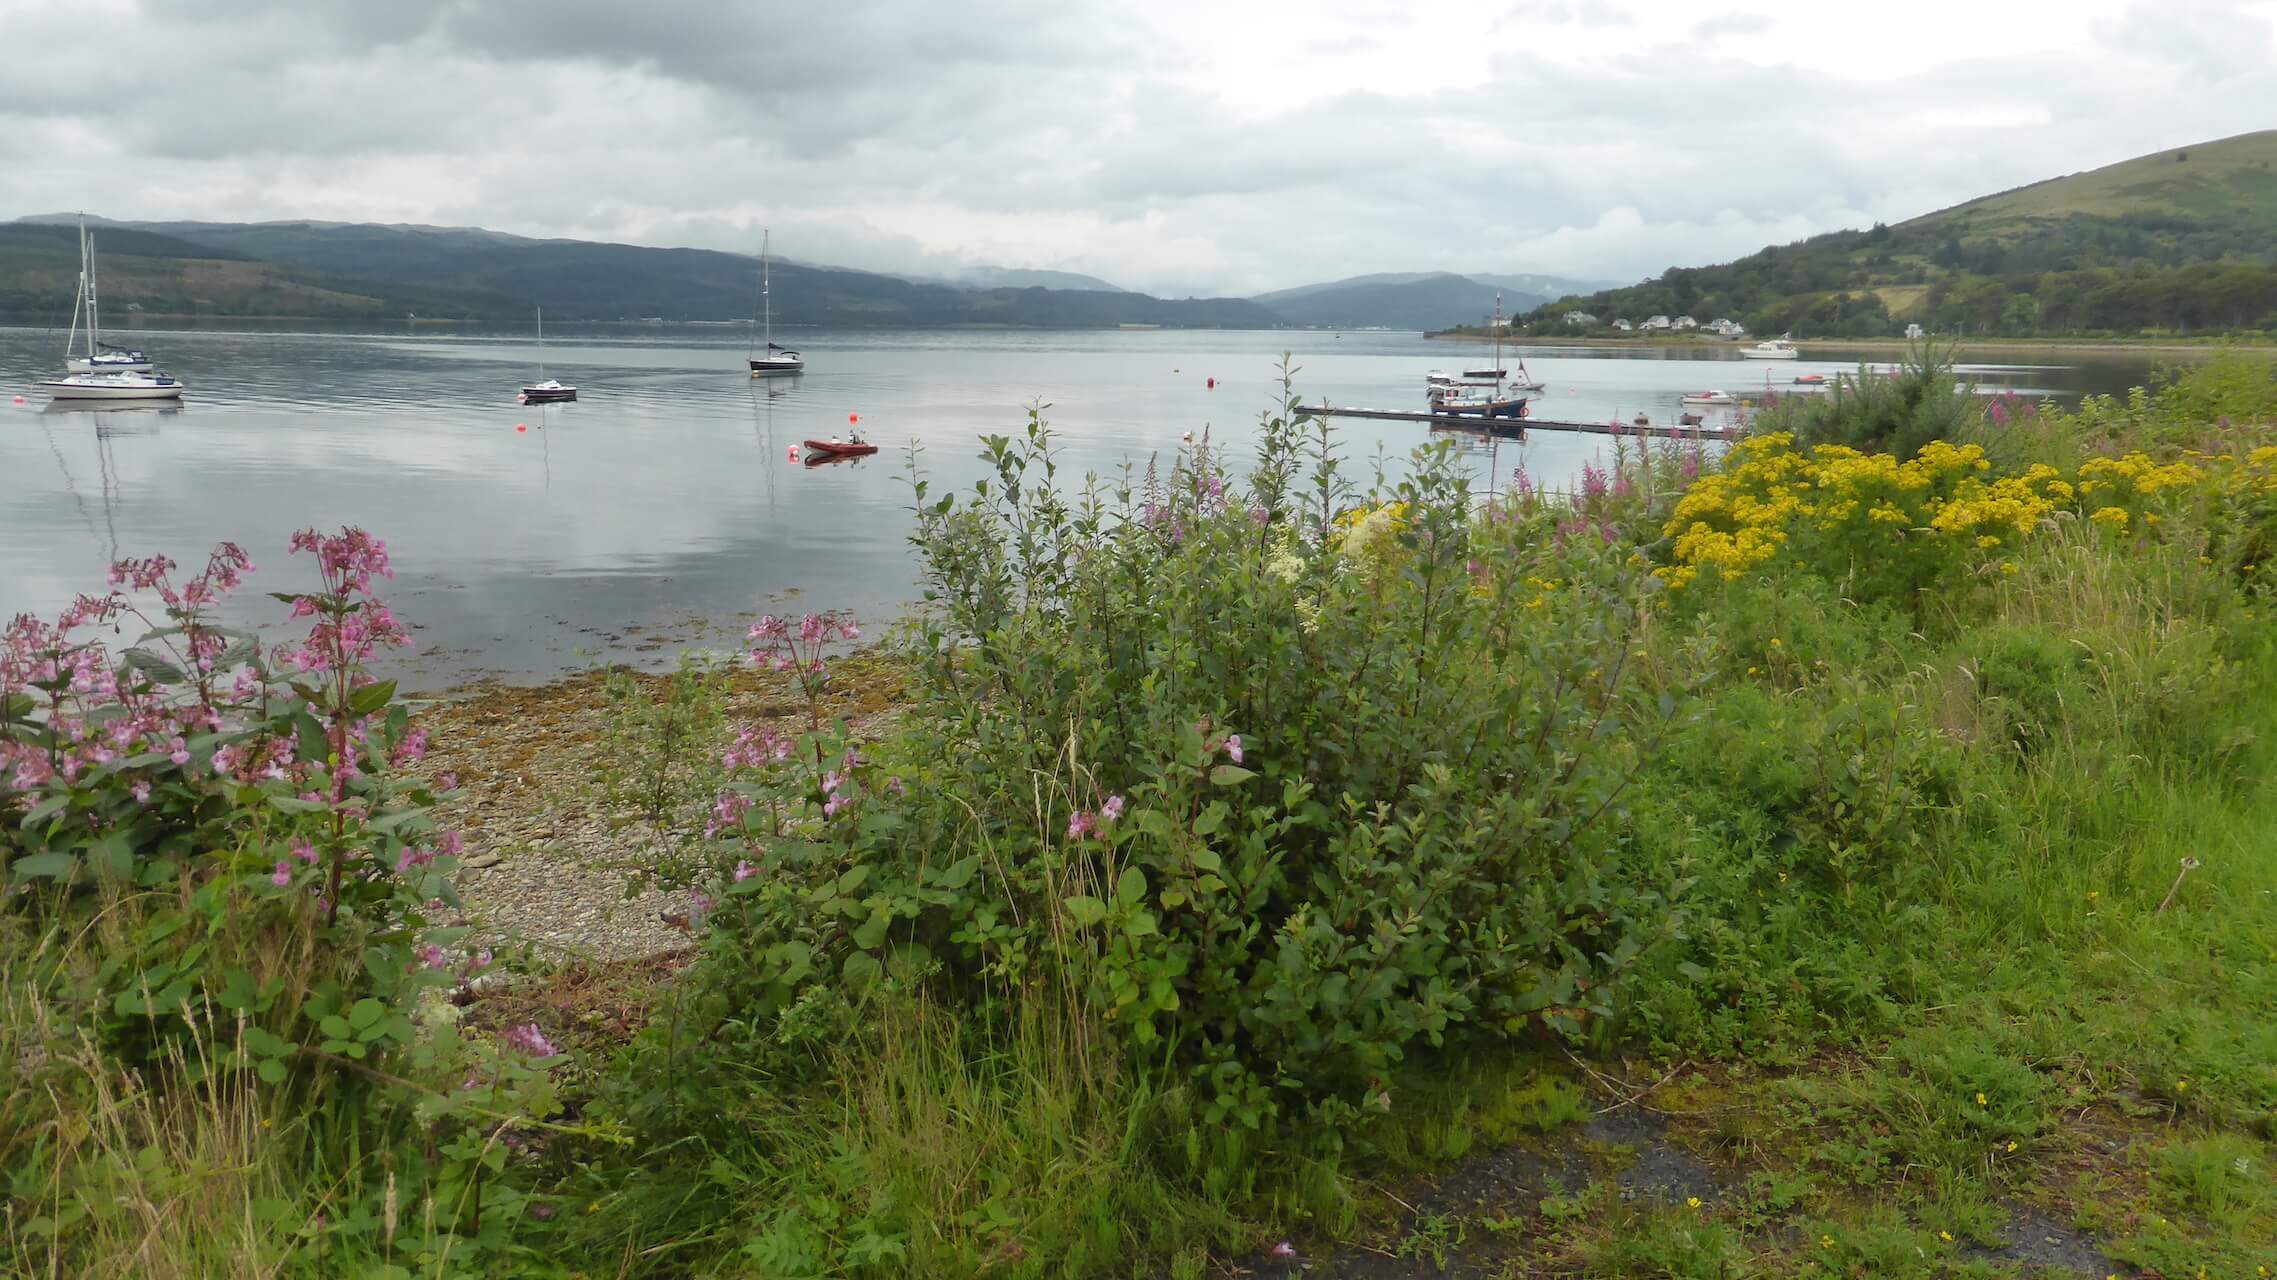 Wildflowers on the shore of Loch Fyne